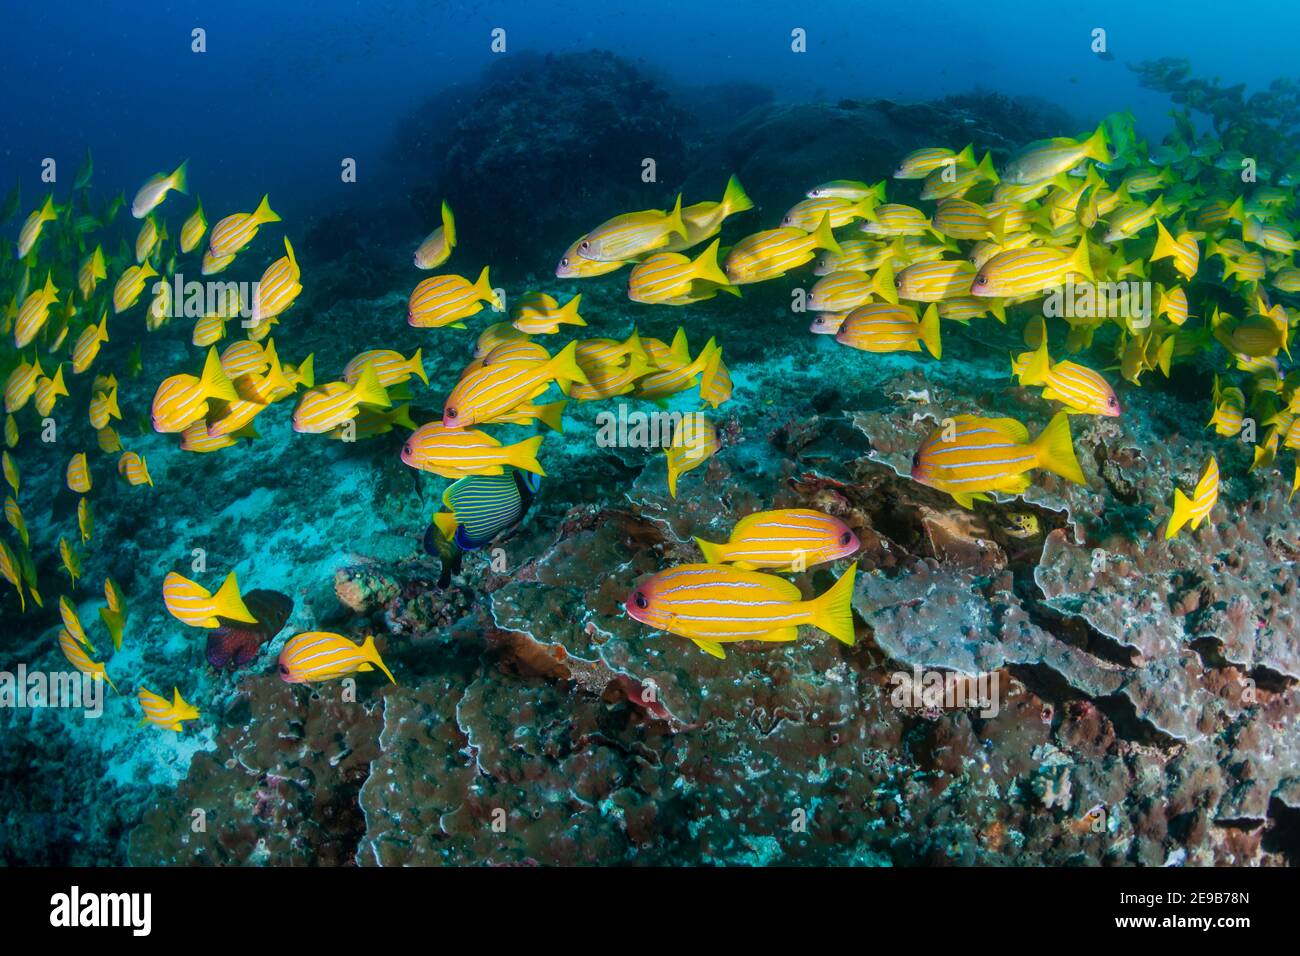 School of colorful five-lined Snapper (Lutjanus quinquelineatus) on a coral reef in the Andaman Sea Stock Photo